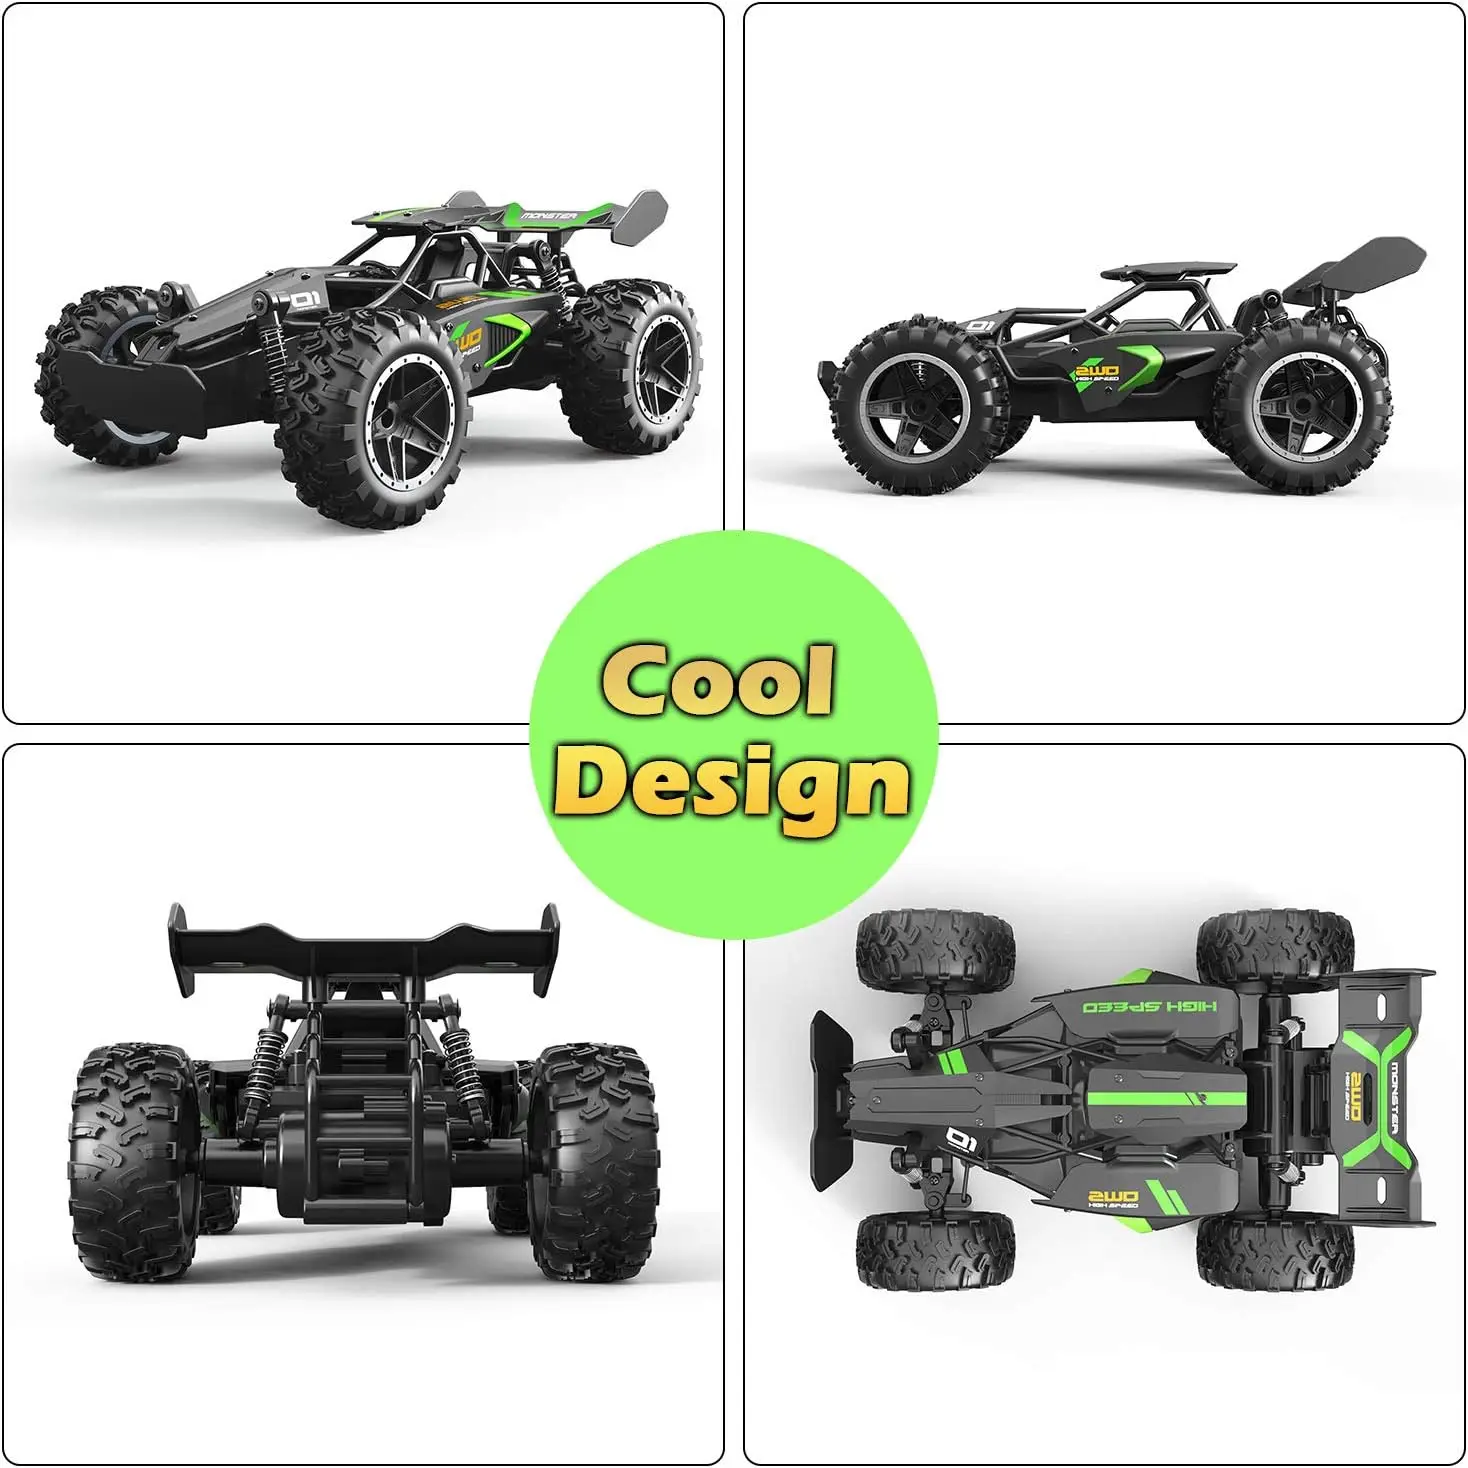 EPT 1:18 15KM/H Small High-speed Off-road 2.4G Remote Control Drifting Car RC Car